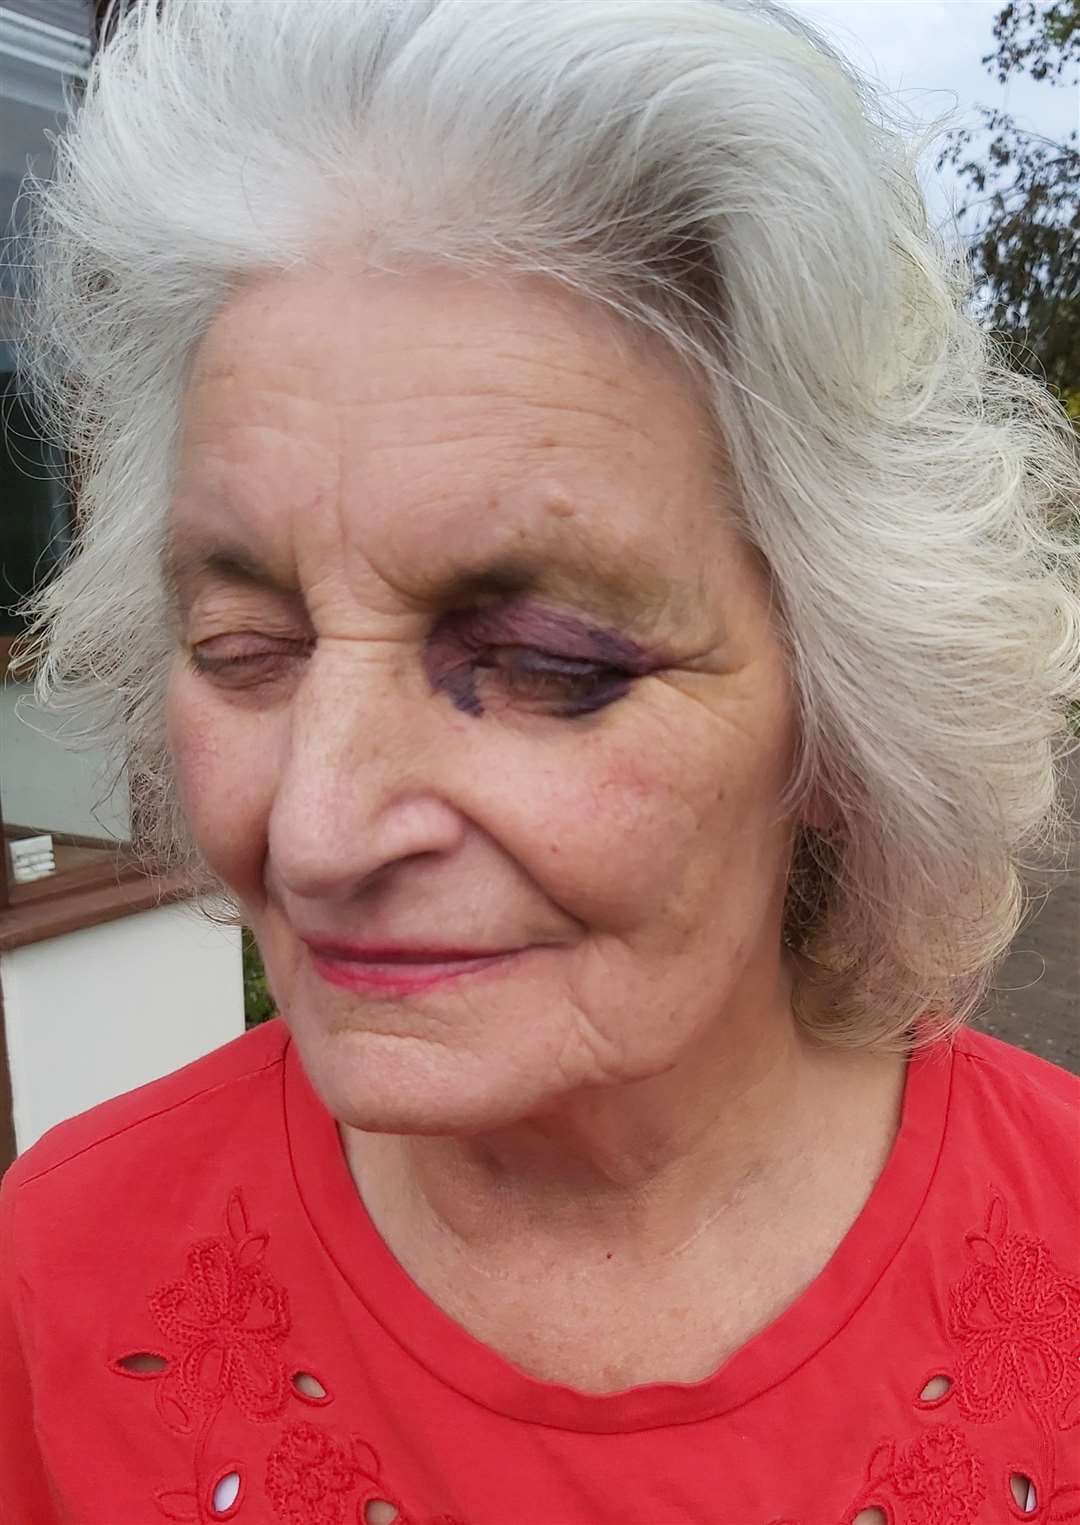 The bruise on Joan Stone's face, where a gun was held against her face